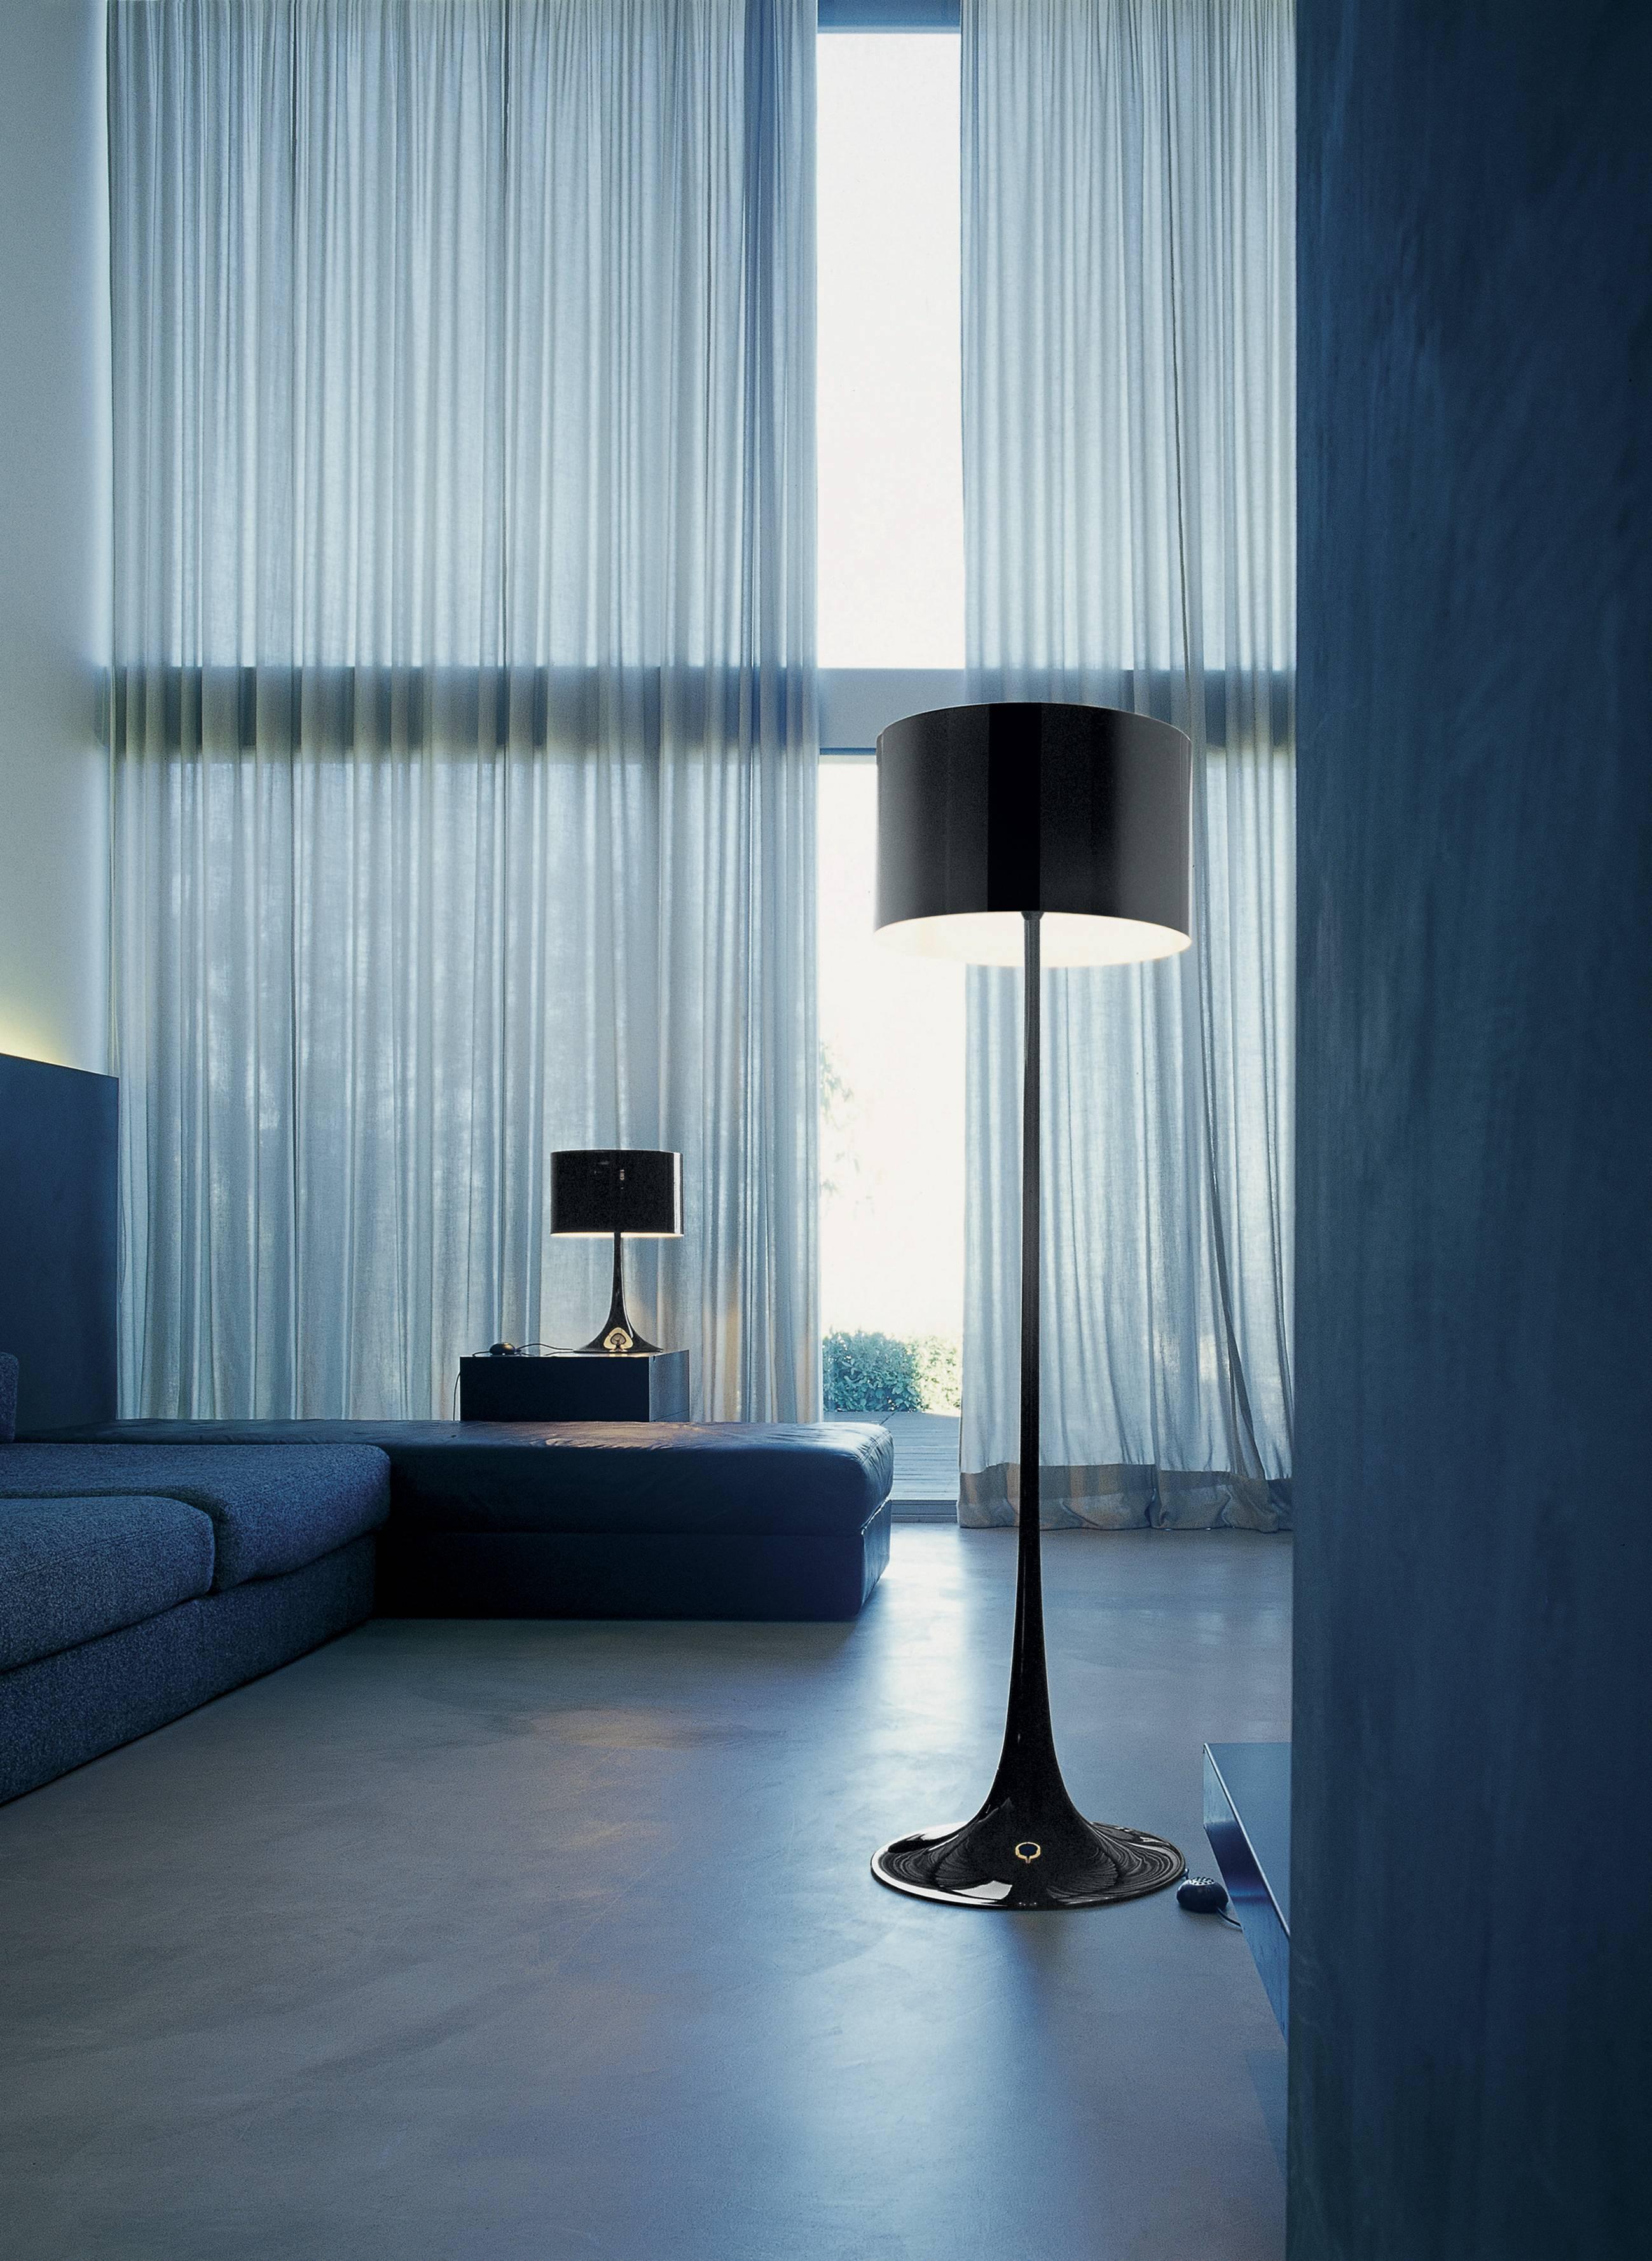 Designed by Sebastian Wrong in 2003, the Spun Light-T table lamp reflects the best of modern manufacturing technology combined with elegance, craftsmanship, and dynamic fluid aesthetics.

Its main body has a spun metal frame and diffuser. The